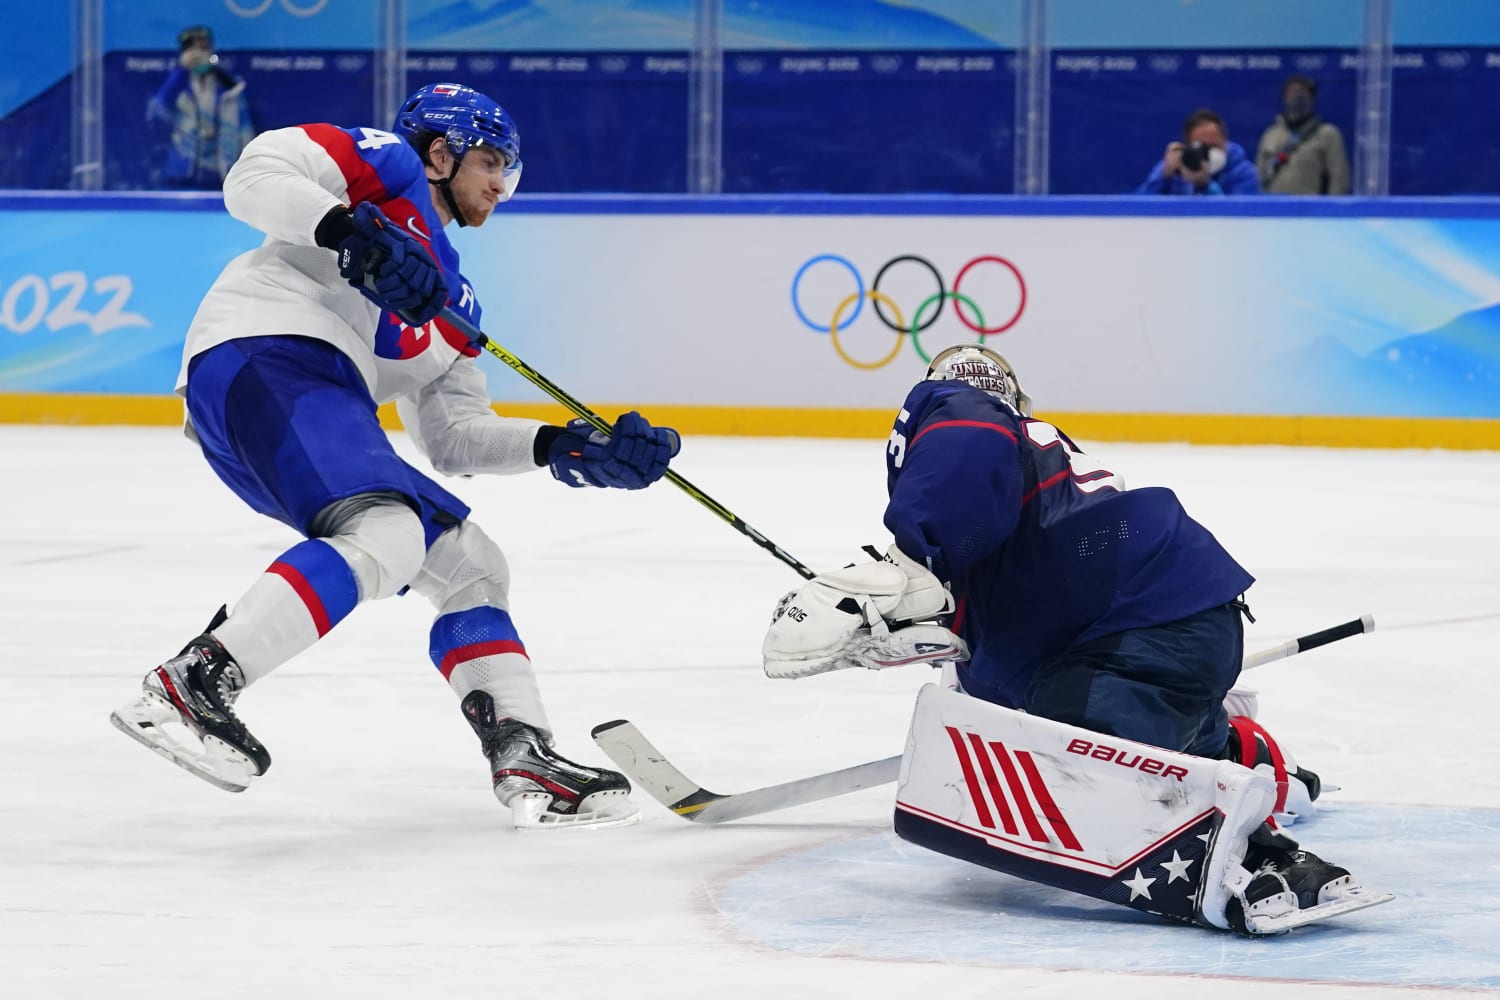 USA men's hockey team Olympic results: Team USA stunned by